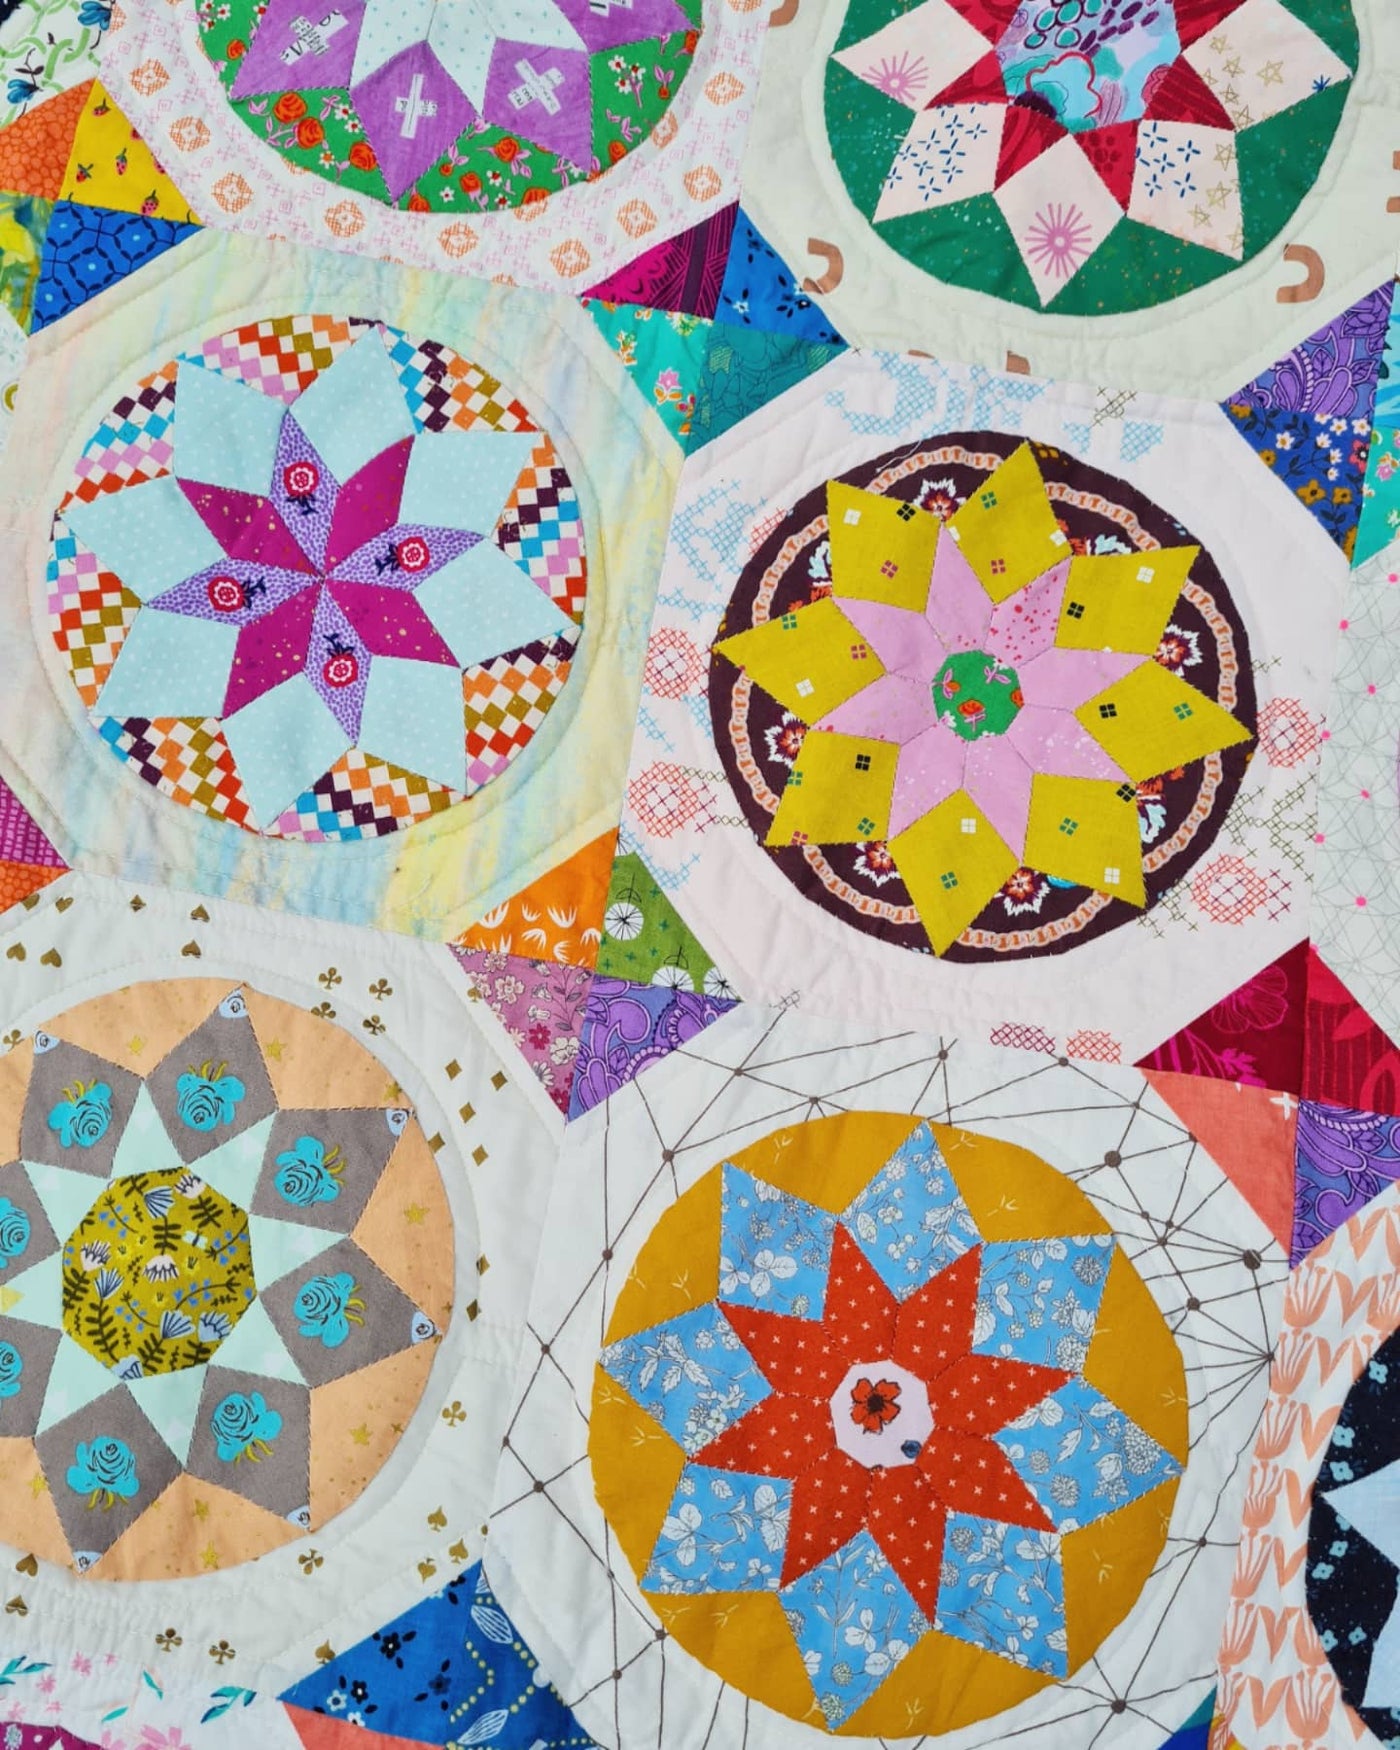 Sunshiny Day Quilt 3 in 1 Bundle